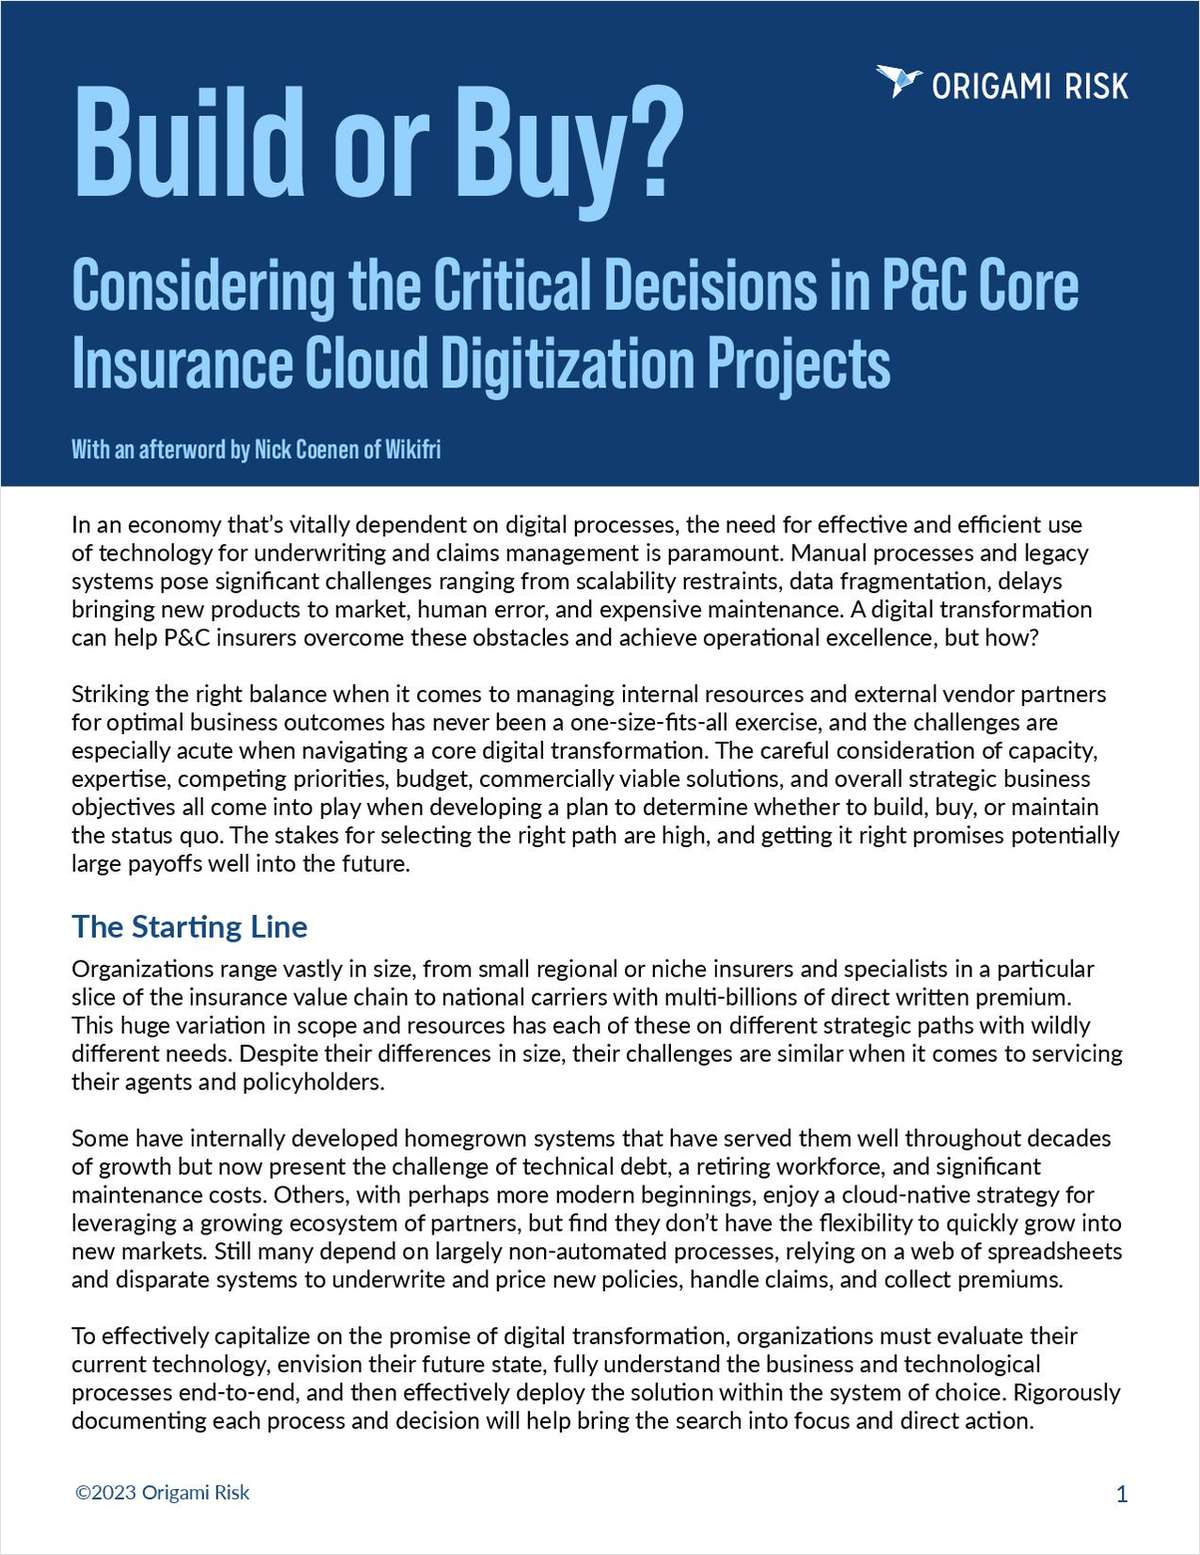 Build or Buy? Considering the Critical Decisions in P&C Core Insurance Cloud Digitization Projects link